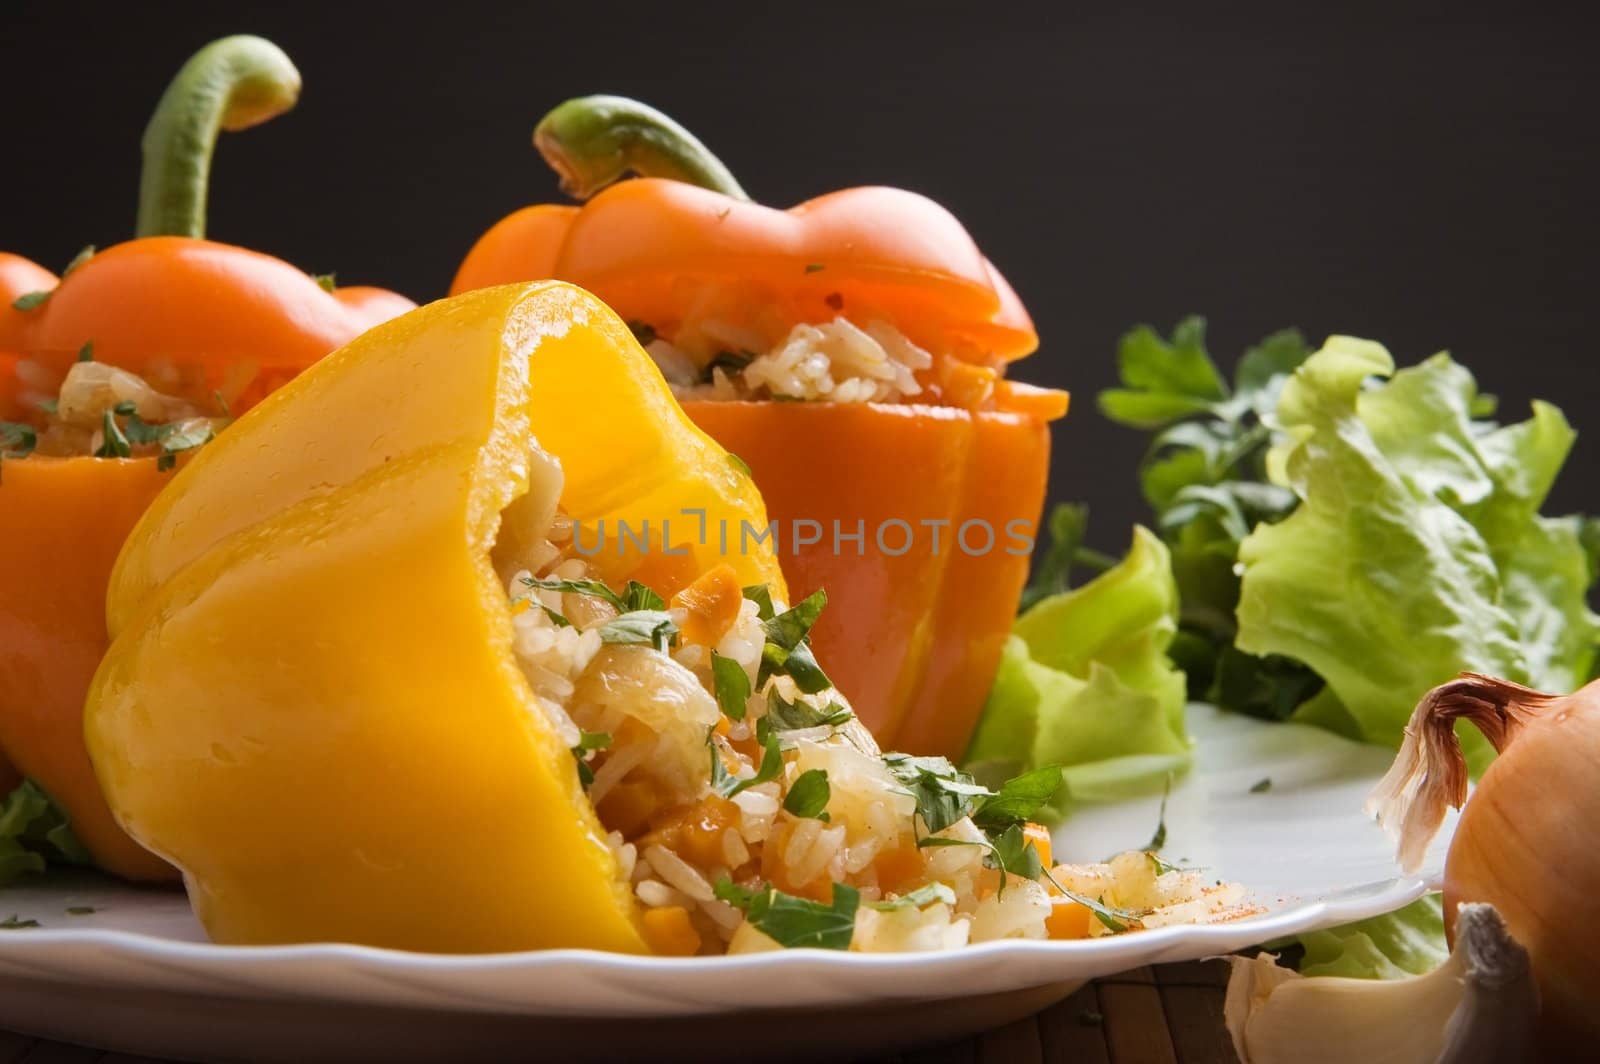 The sweet bulgarian pepper with vegetables and rice